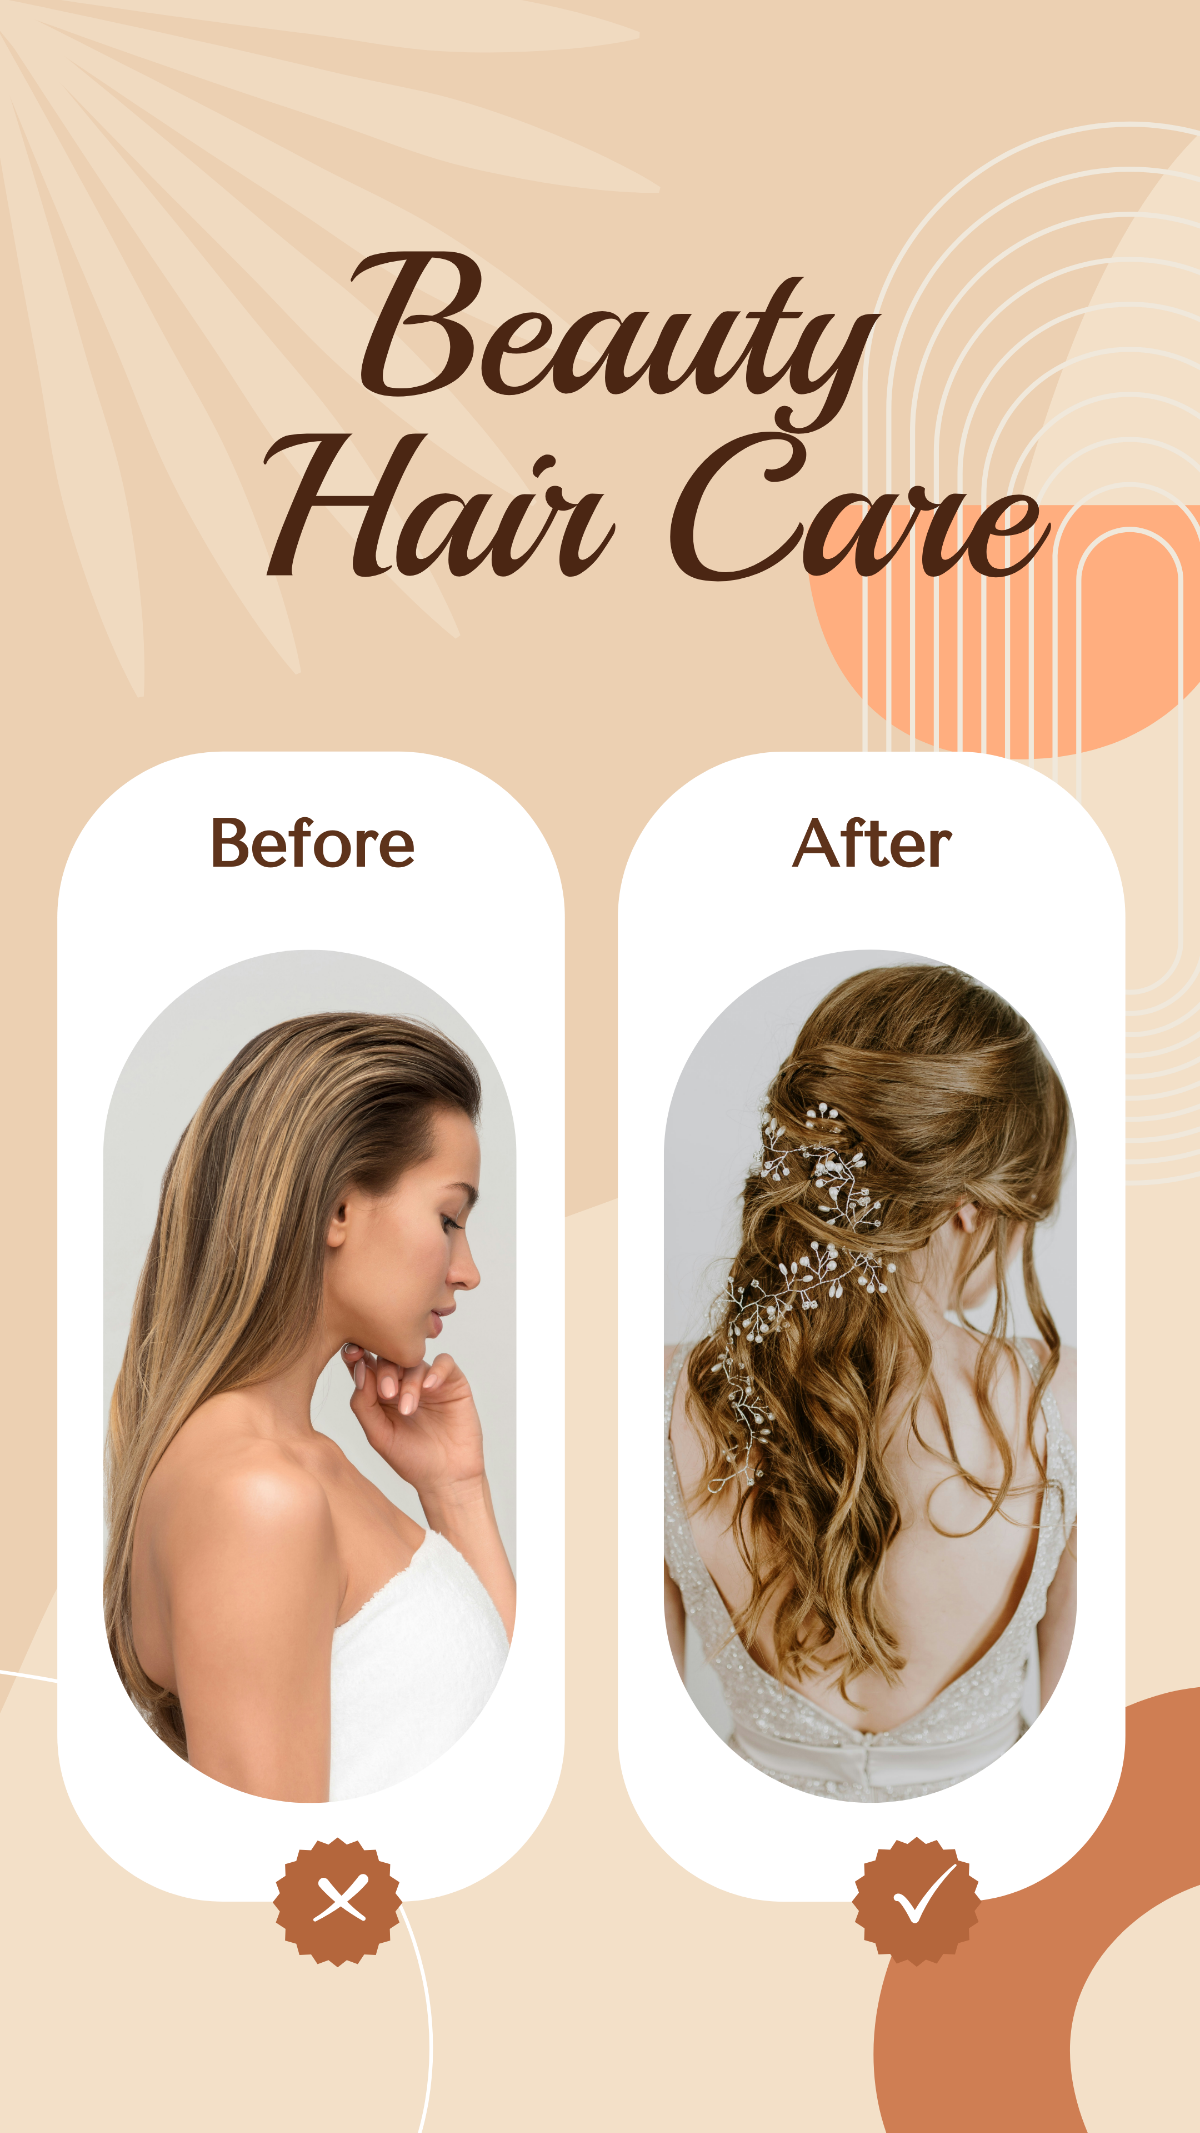 Beauty Hair Care Before and After Instagram Post Template